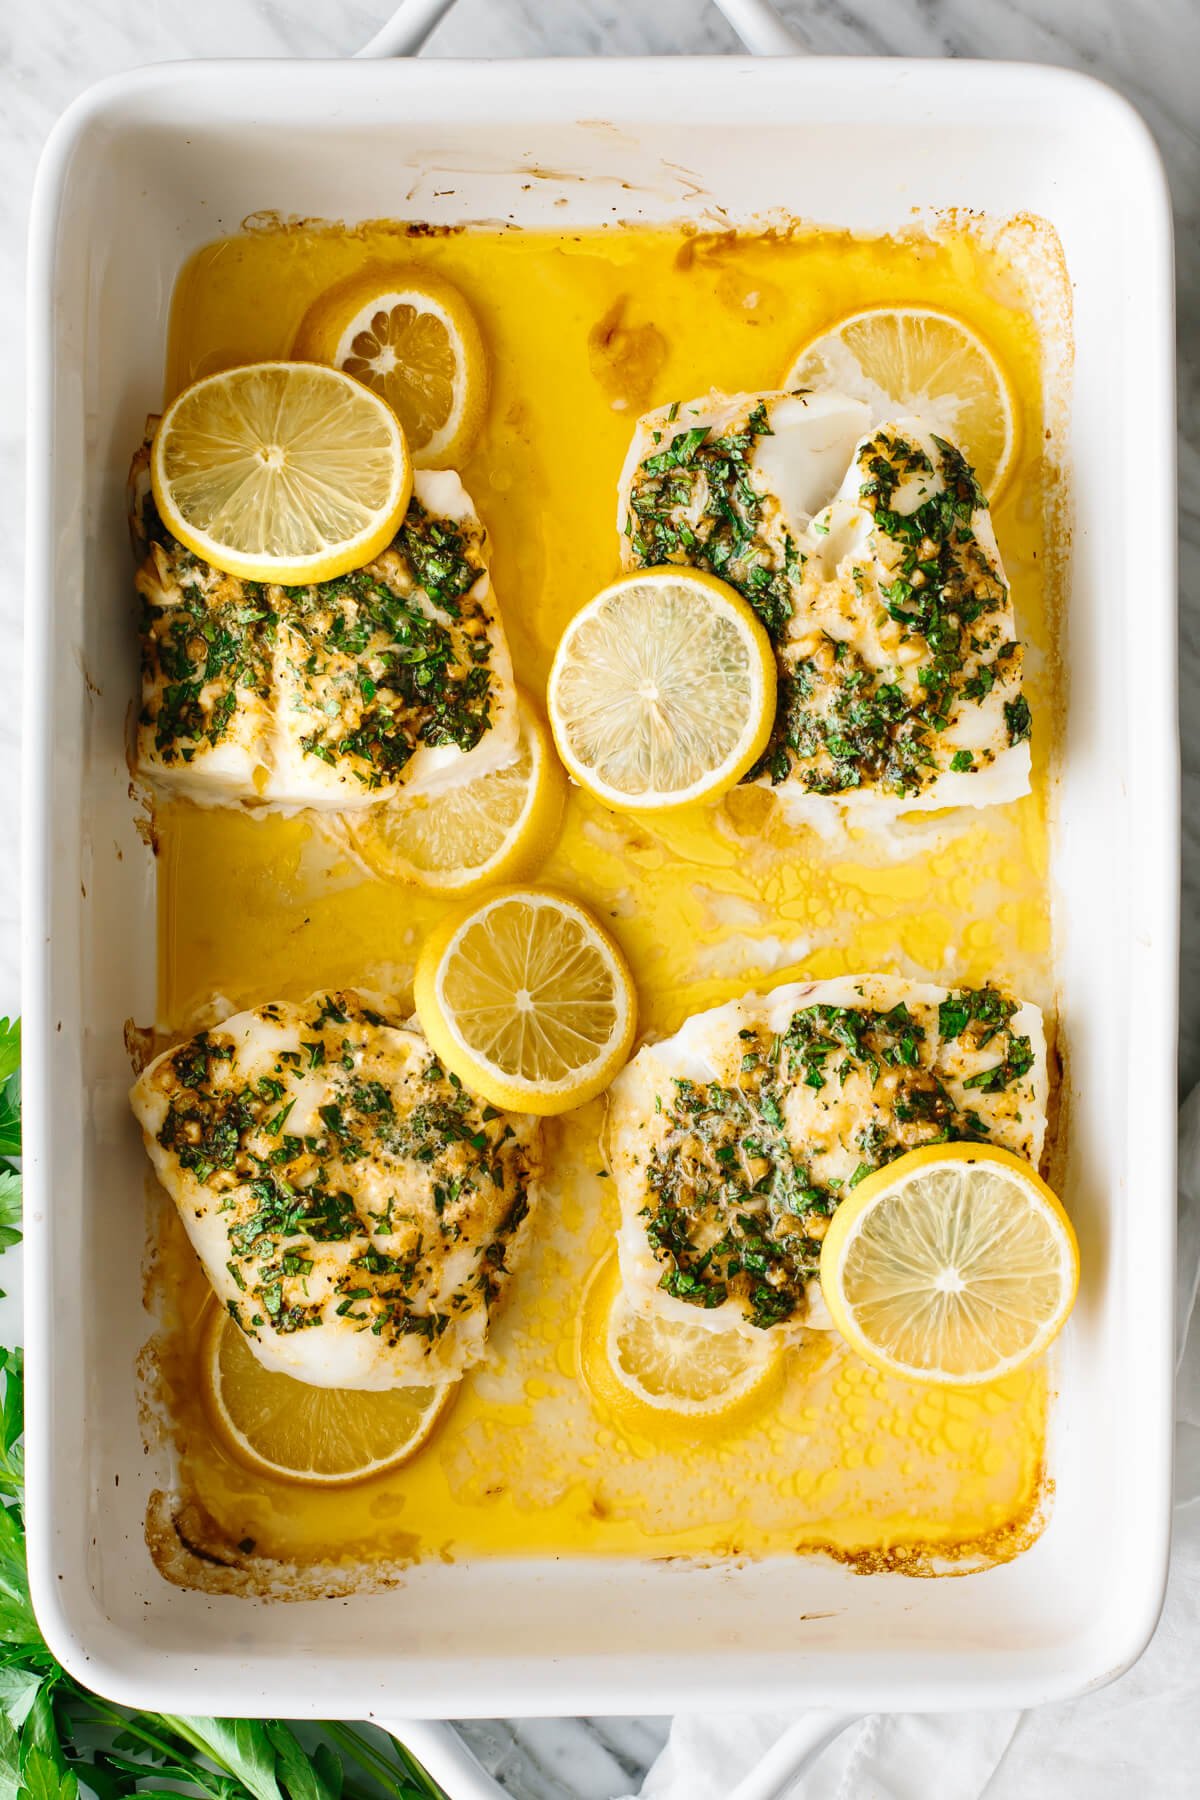 Baked cod with lemon slices in a baking dish.